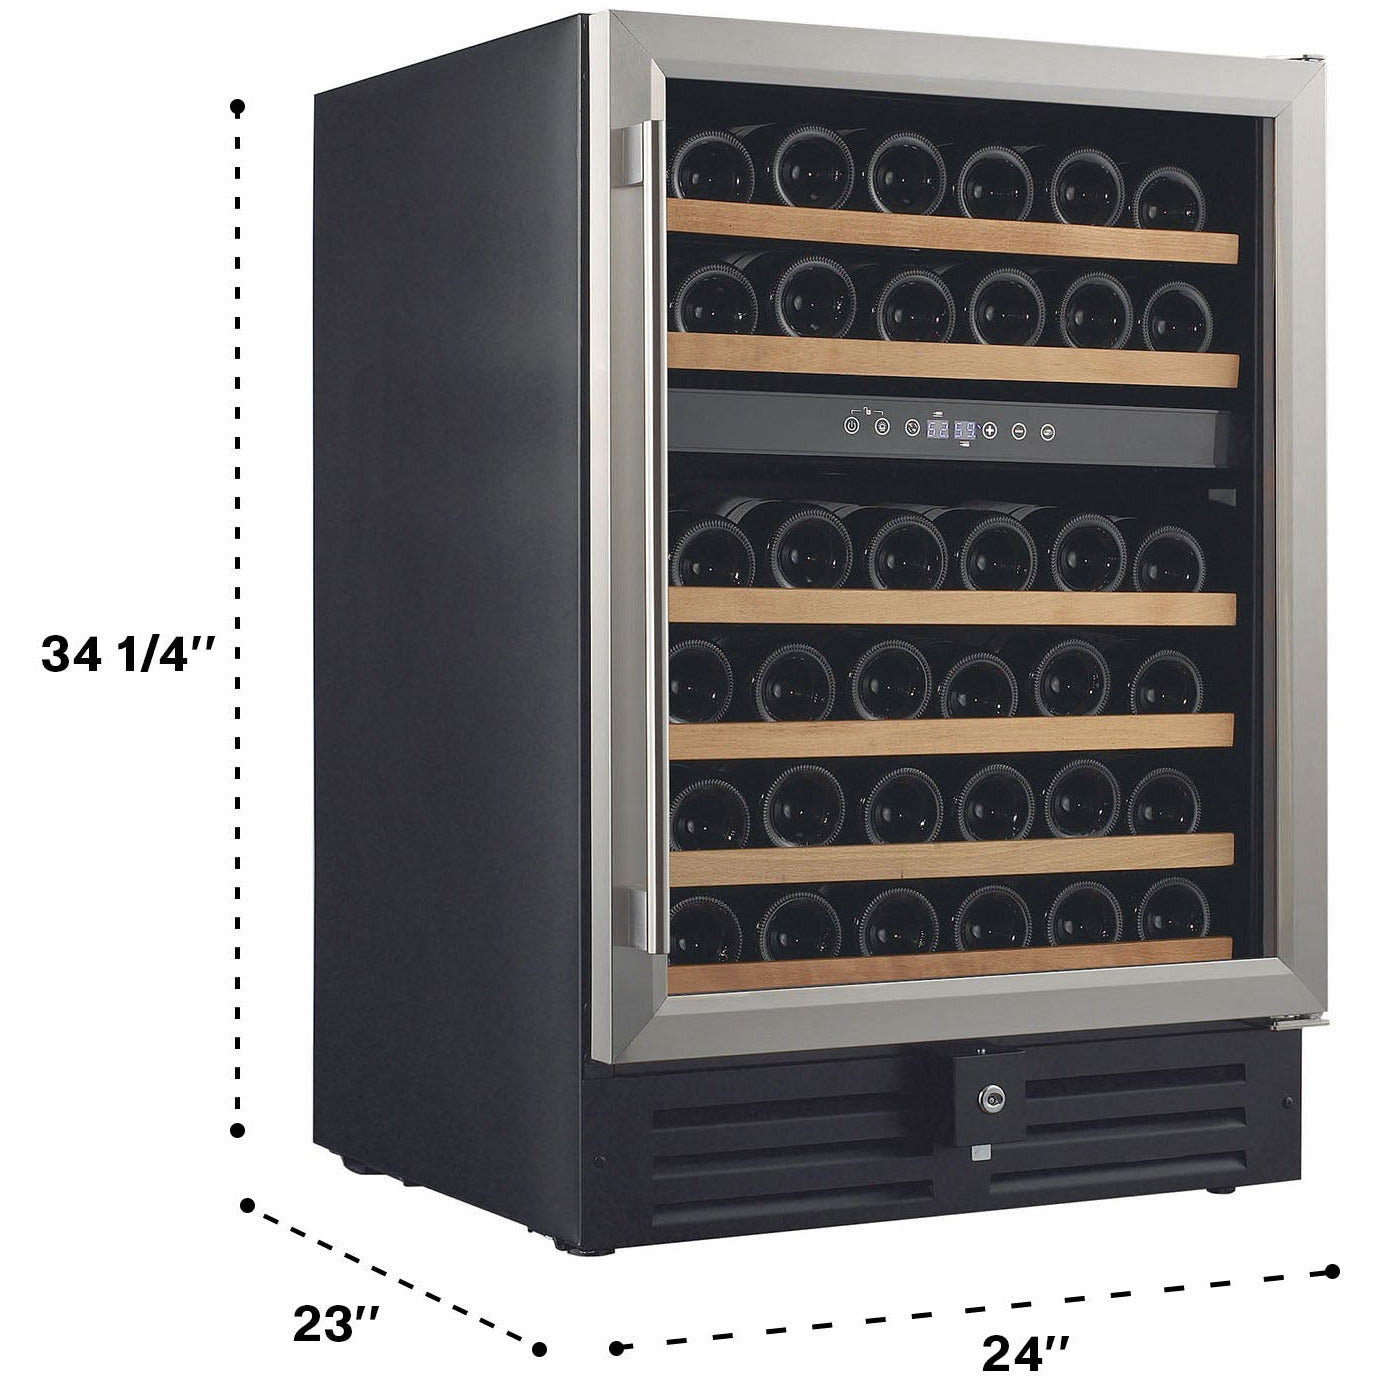 Smith & Hanks 24" Dual Zone Wine Cooler | Holds 46 Bottles | RW145DR